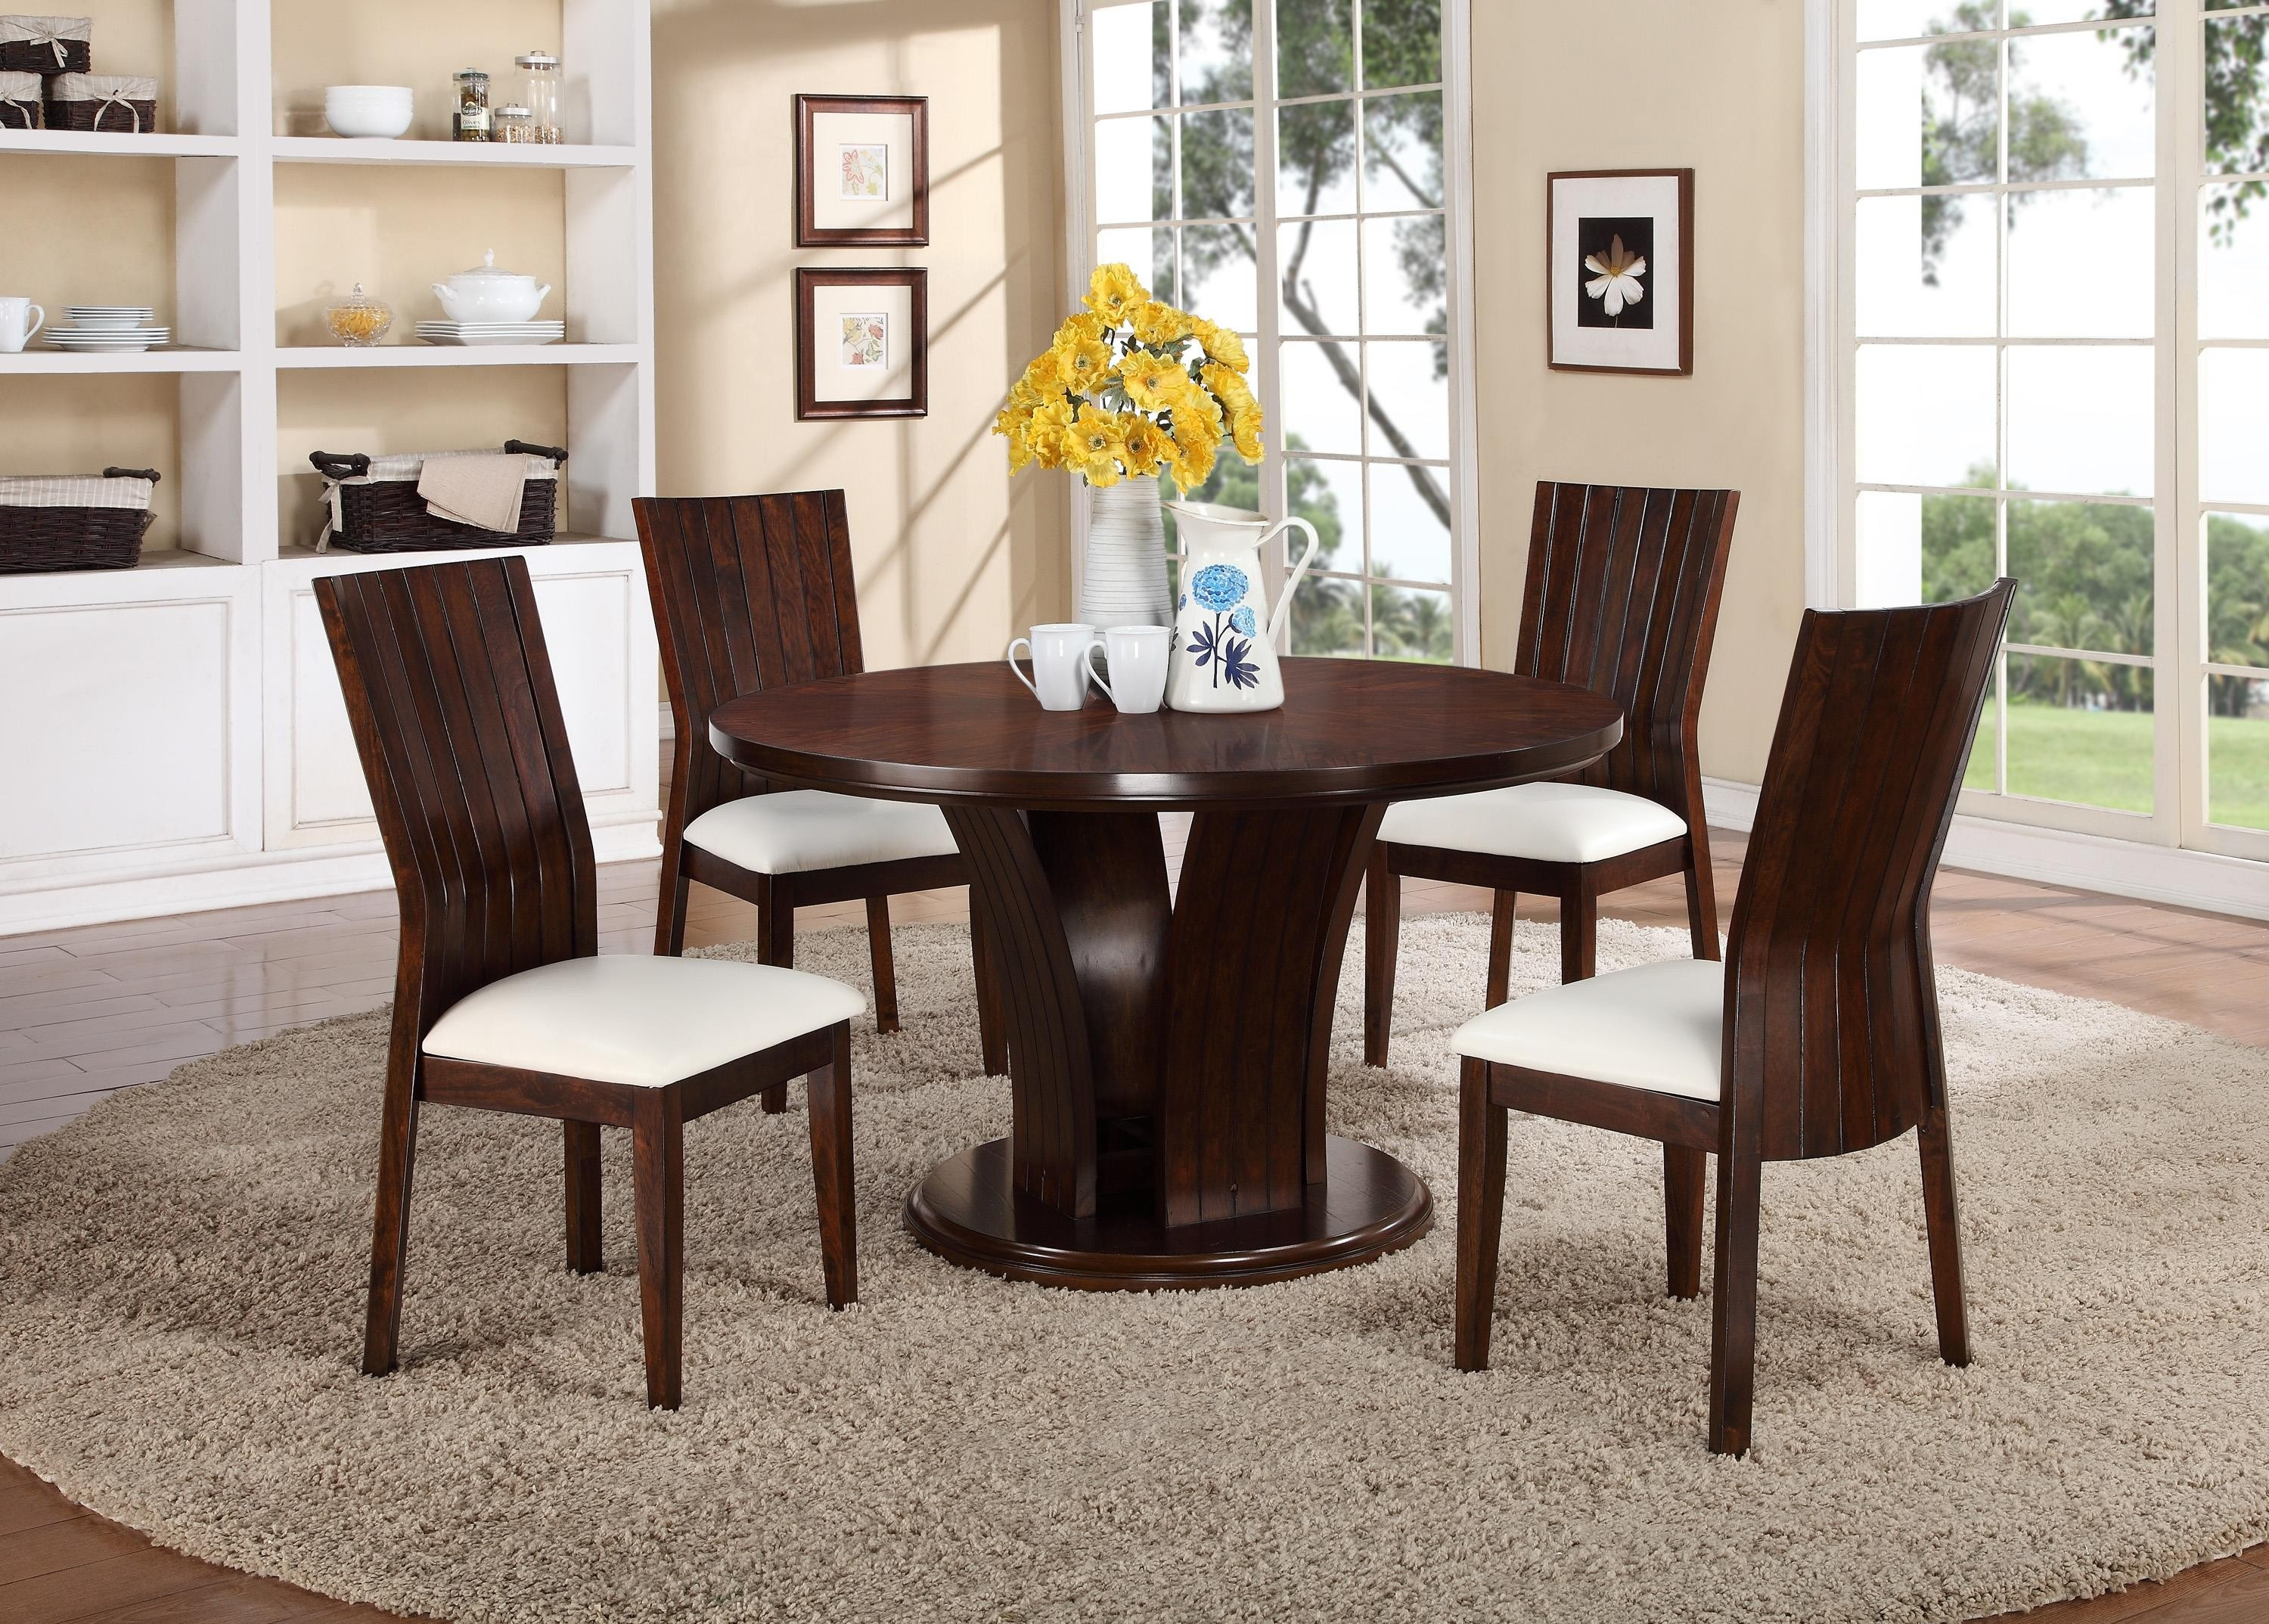 Round Dining Table Kijiji Ottawa Archives Masclientesmx New for dimensions 3000 X 2147